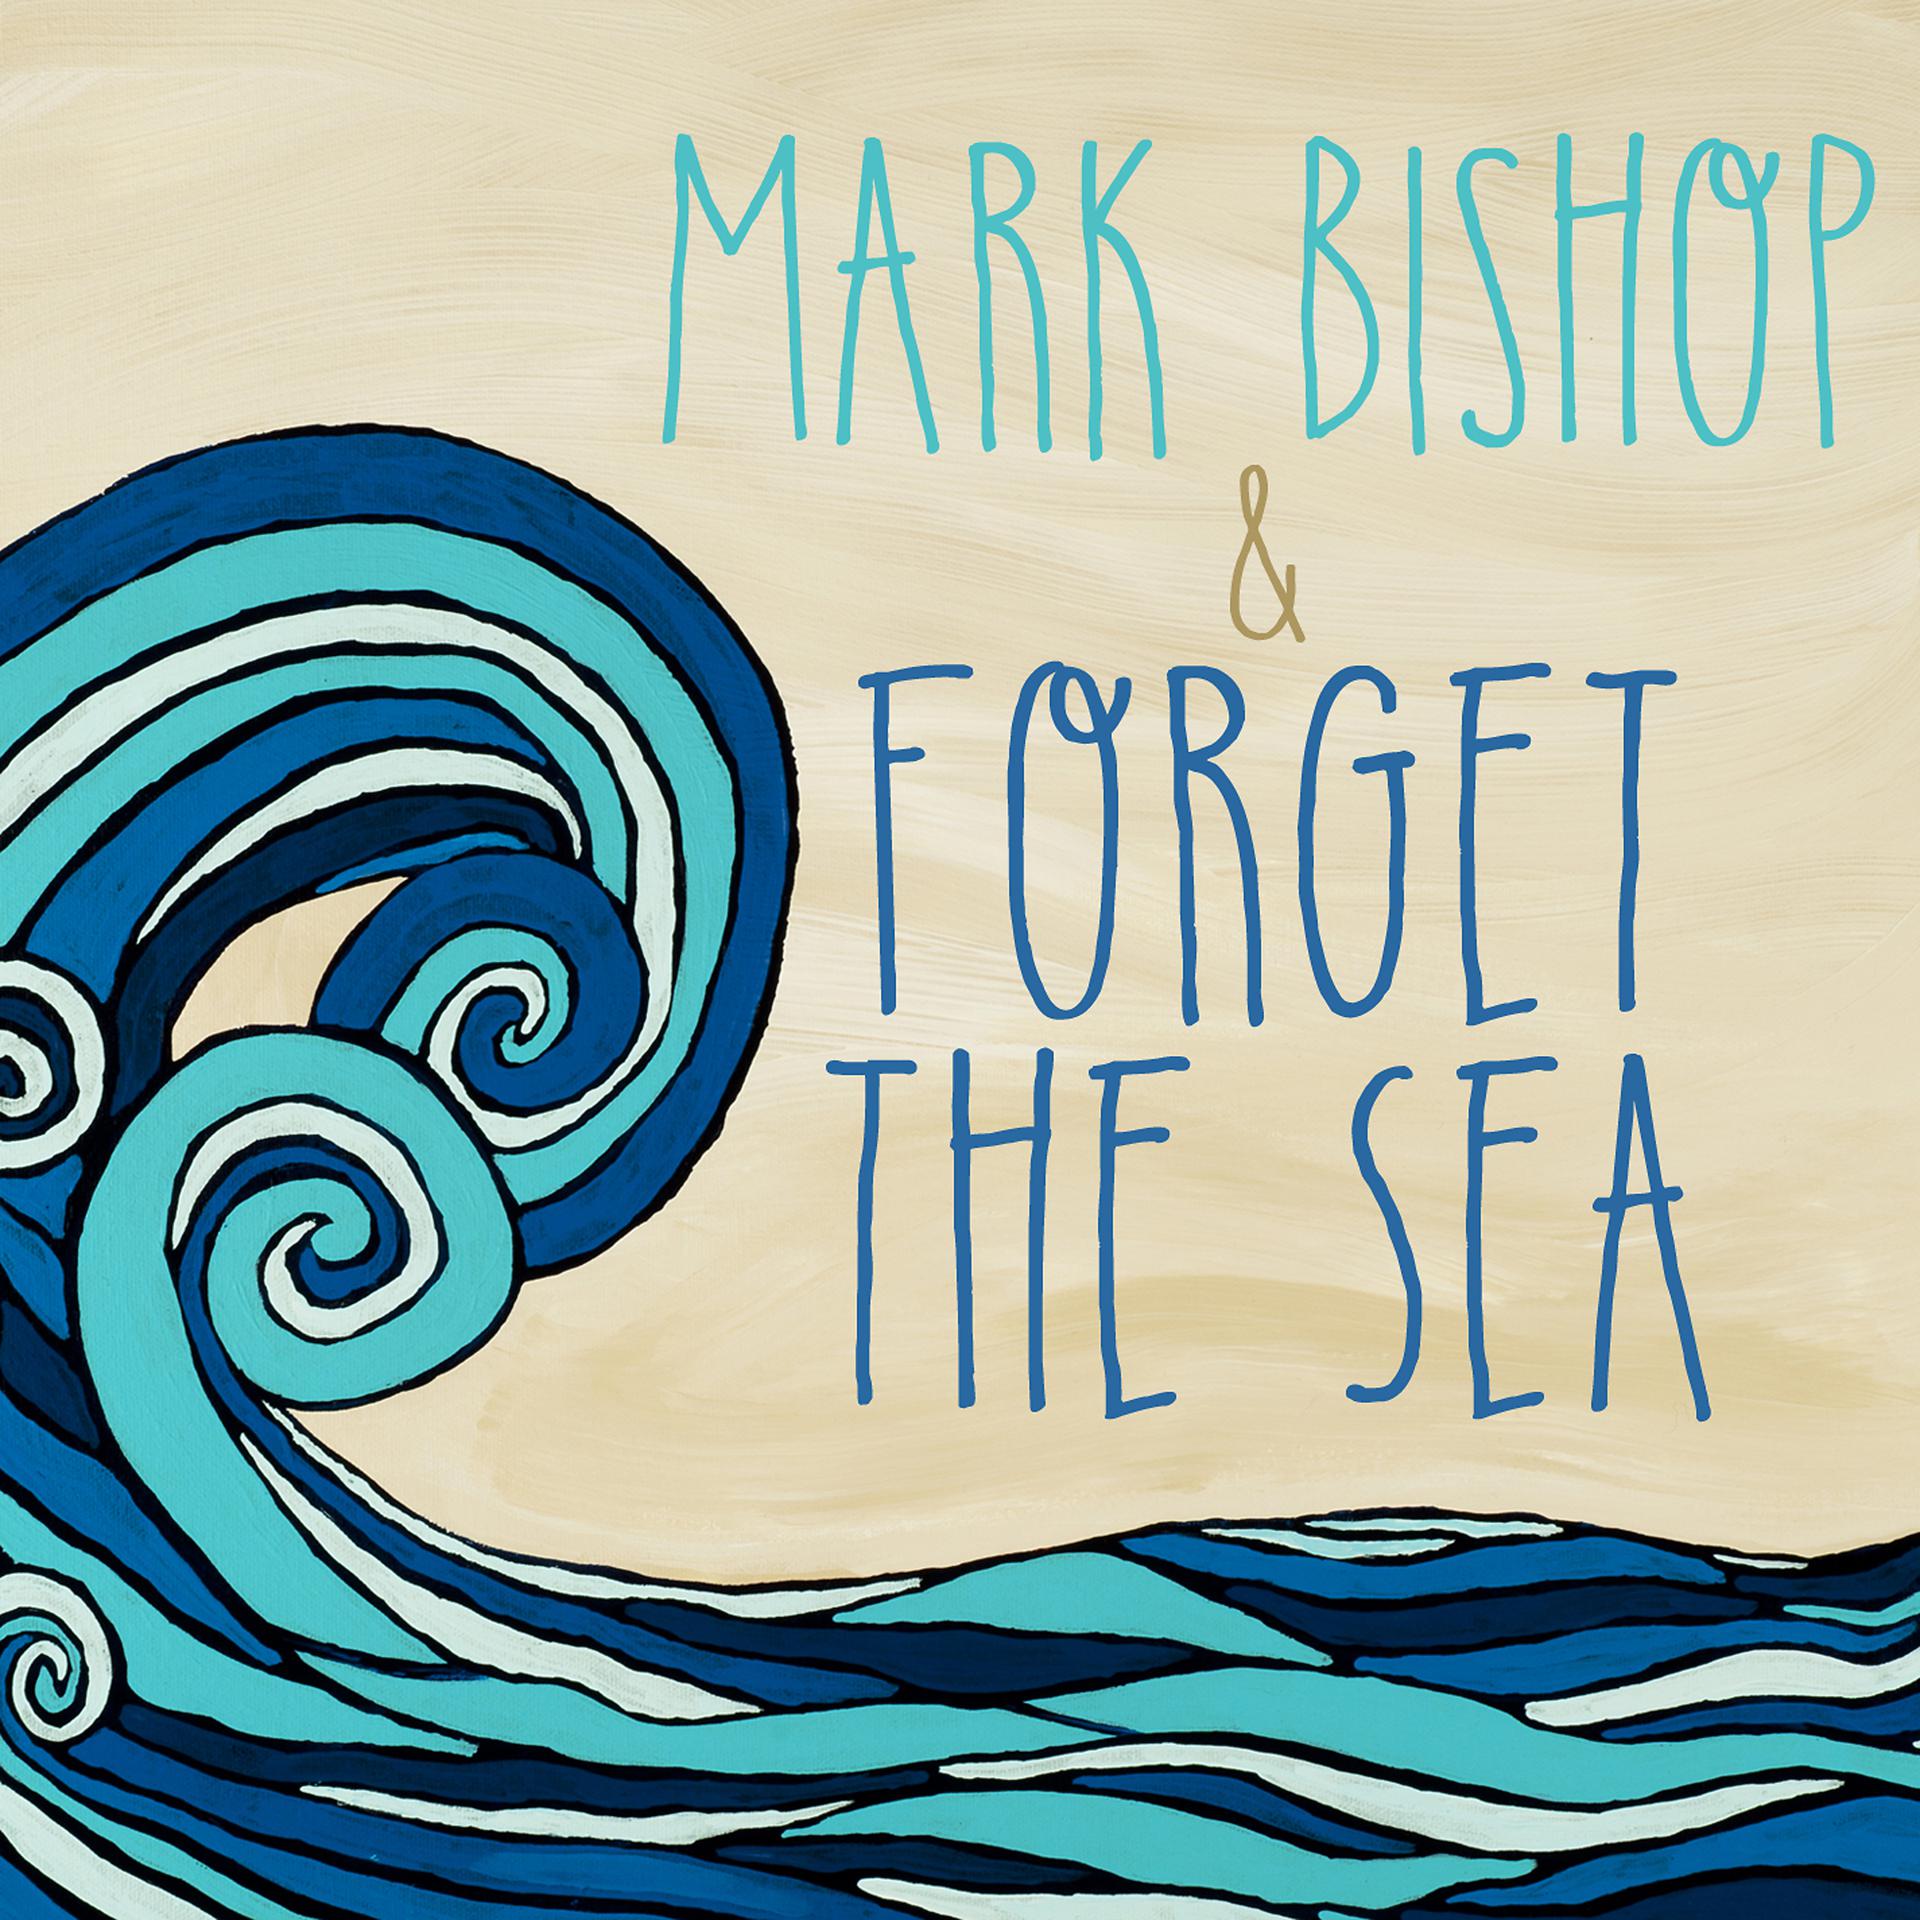 Постер к треку Mark Bishop, Forget the Sea - You Are, You Are